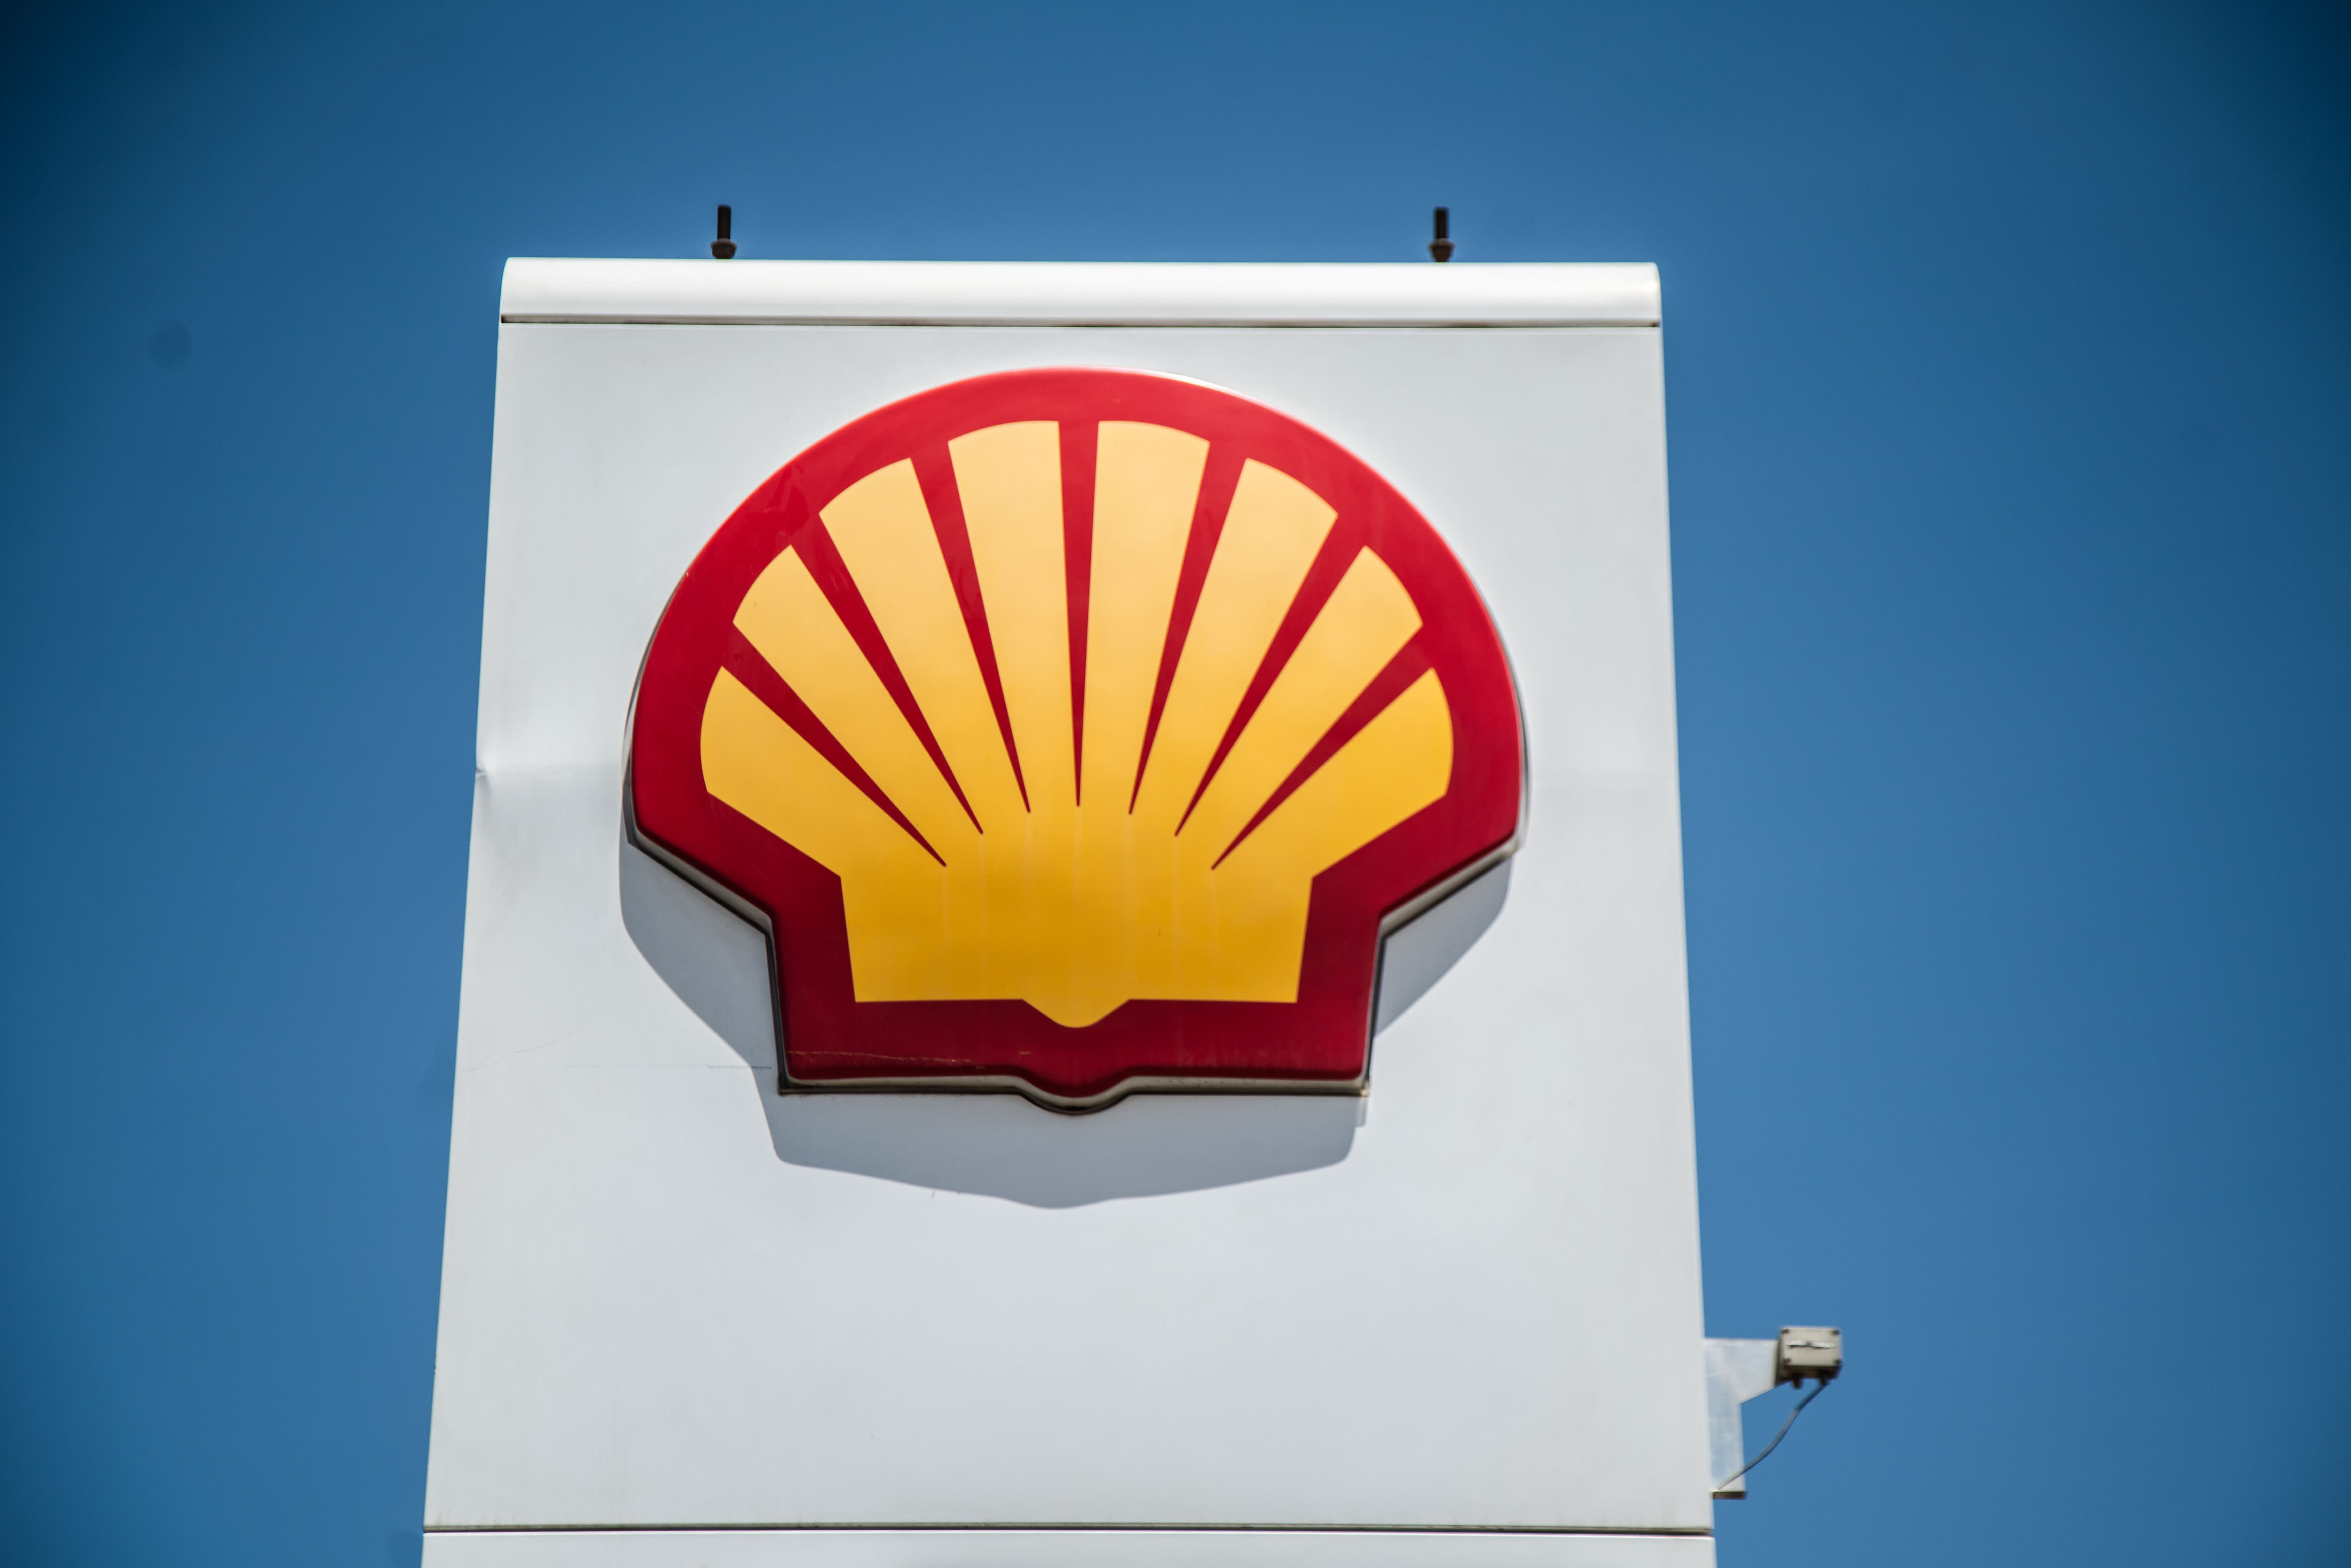 Oil giant Shell posts full-year profit beat, announces $3.5 billion share buyback